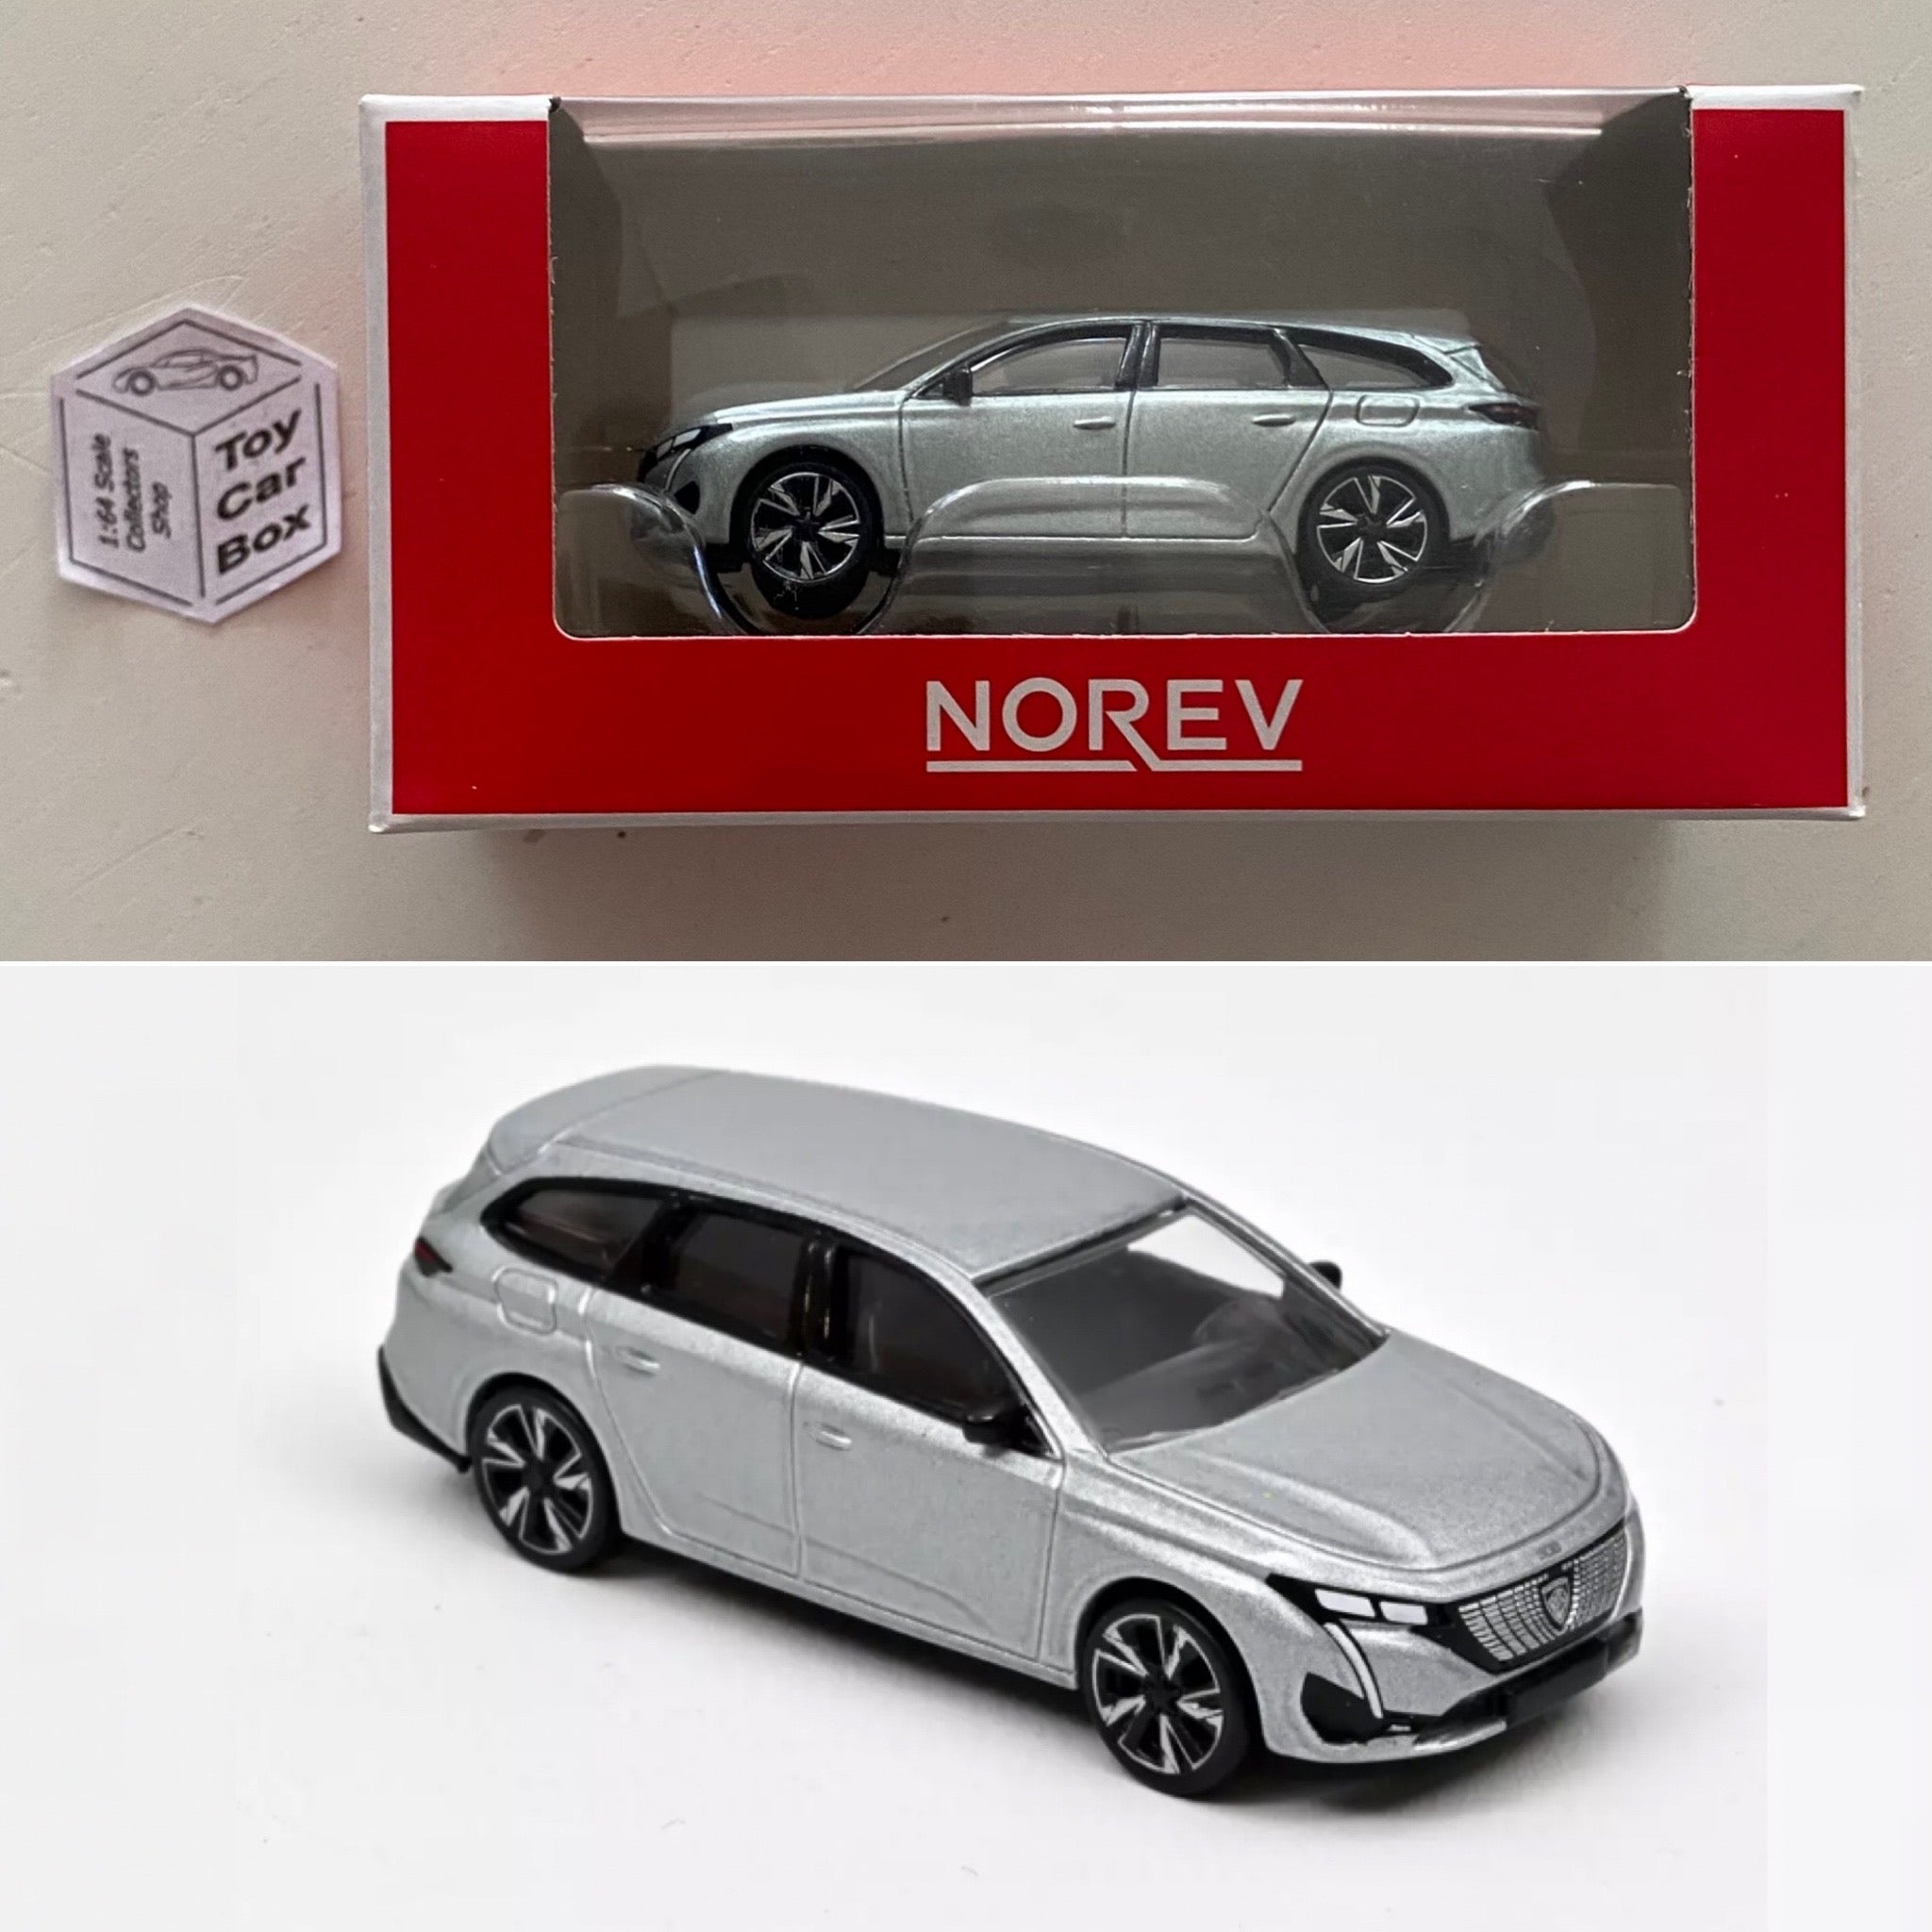 NOREV 3 inches 1/60. Peugeot 308 Grey mk1. New IN Box